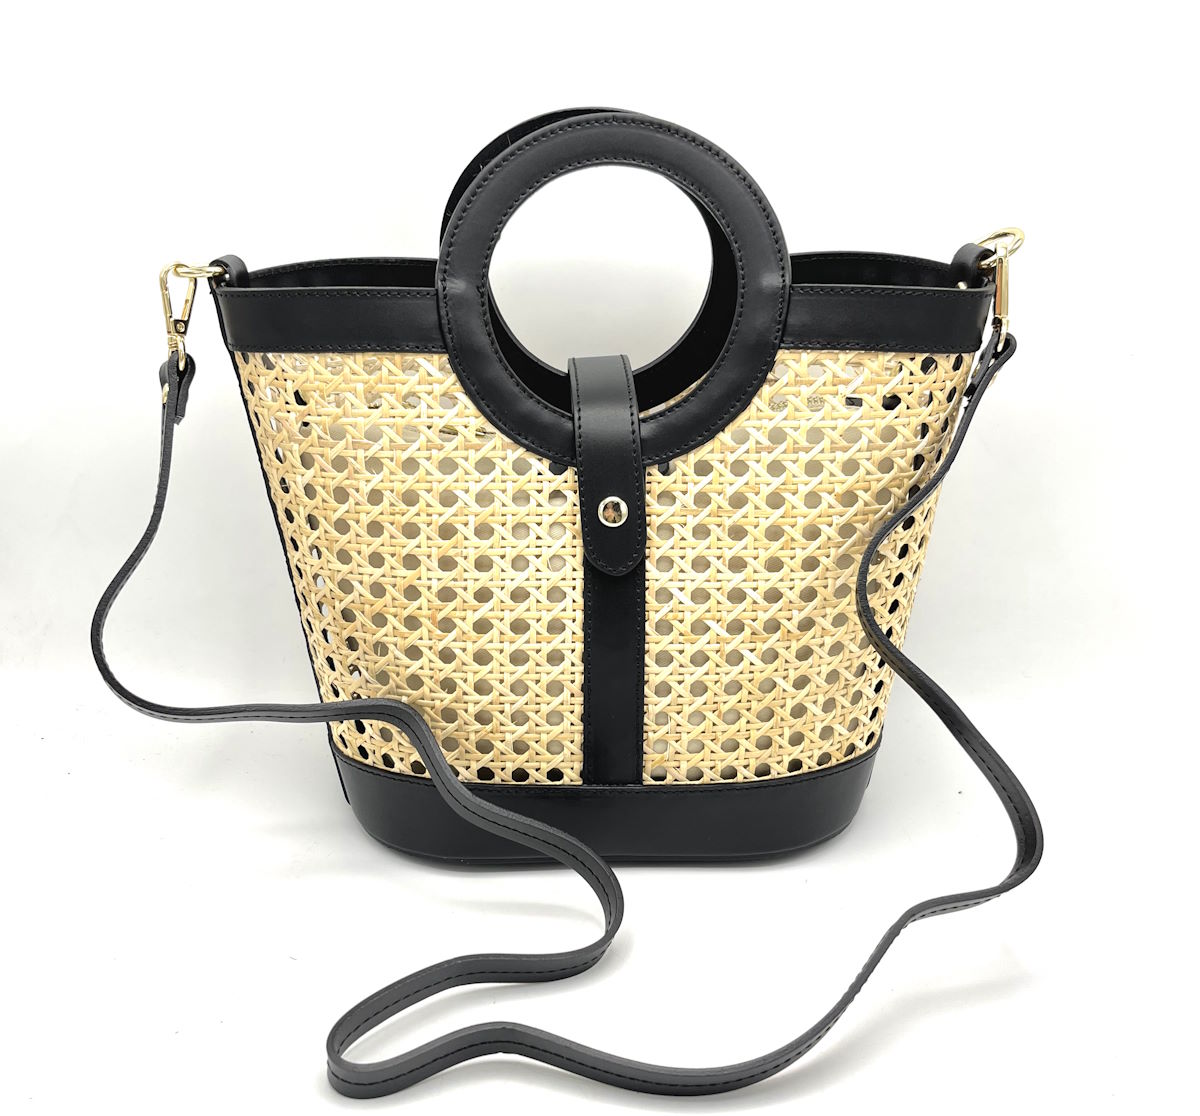 Genuine leather and straw bag, Made in Italy, art. 112456